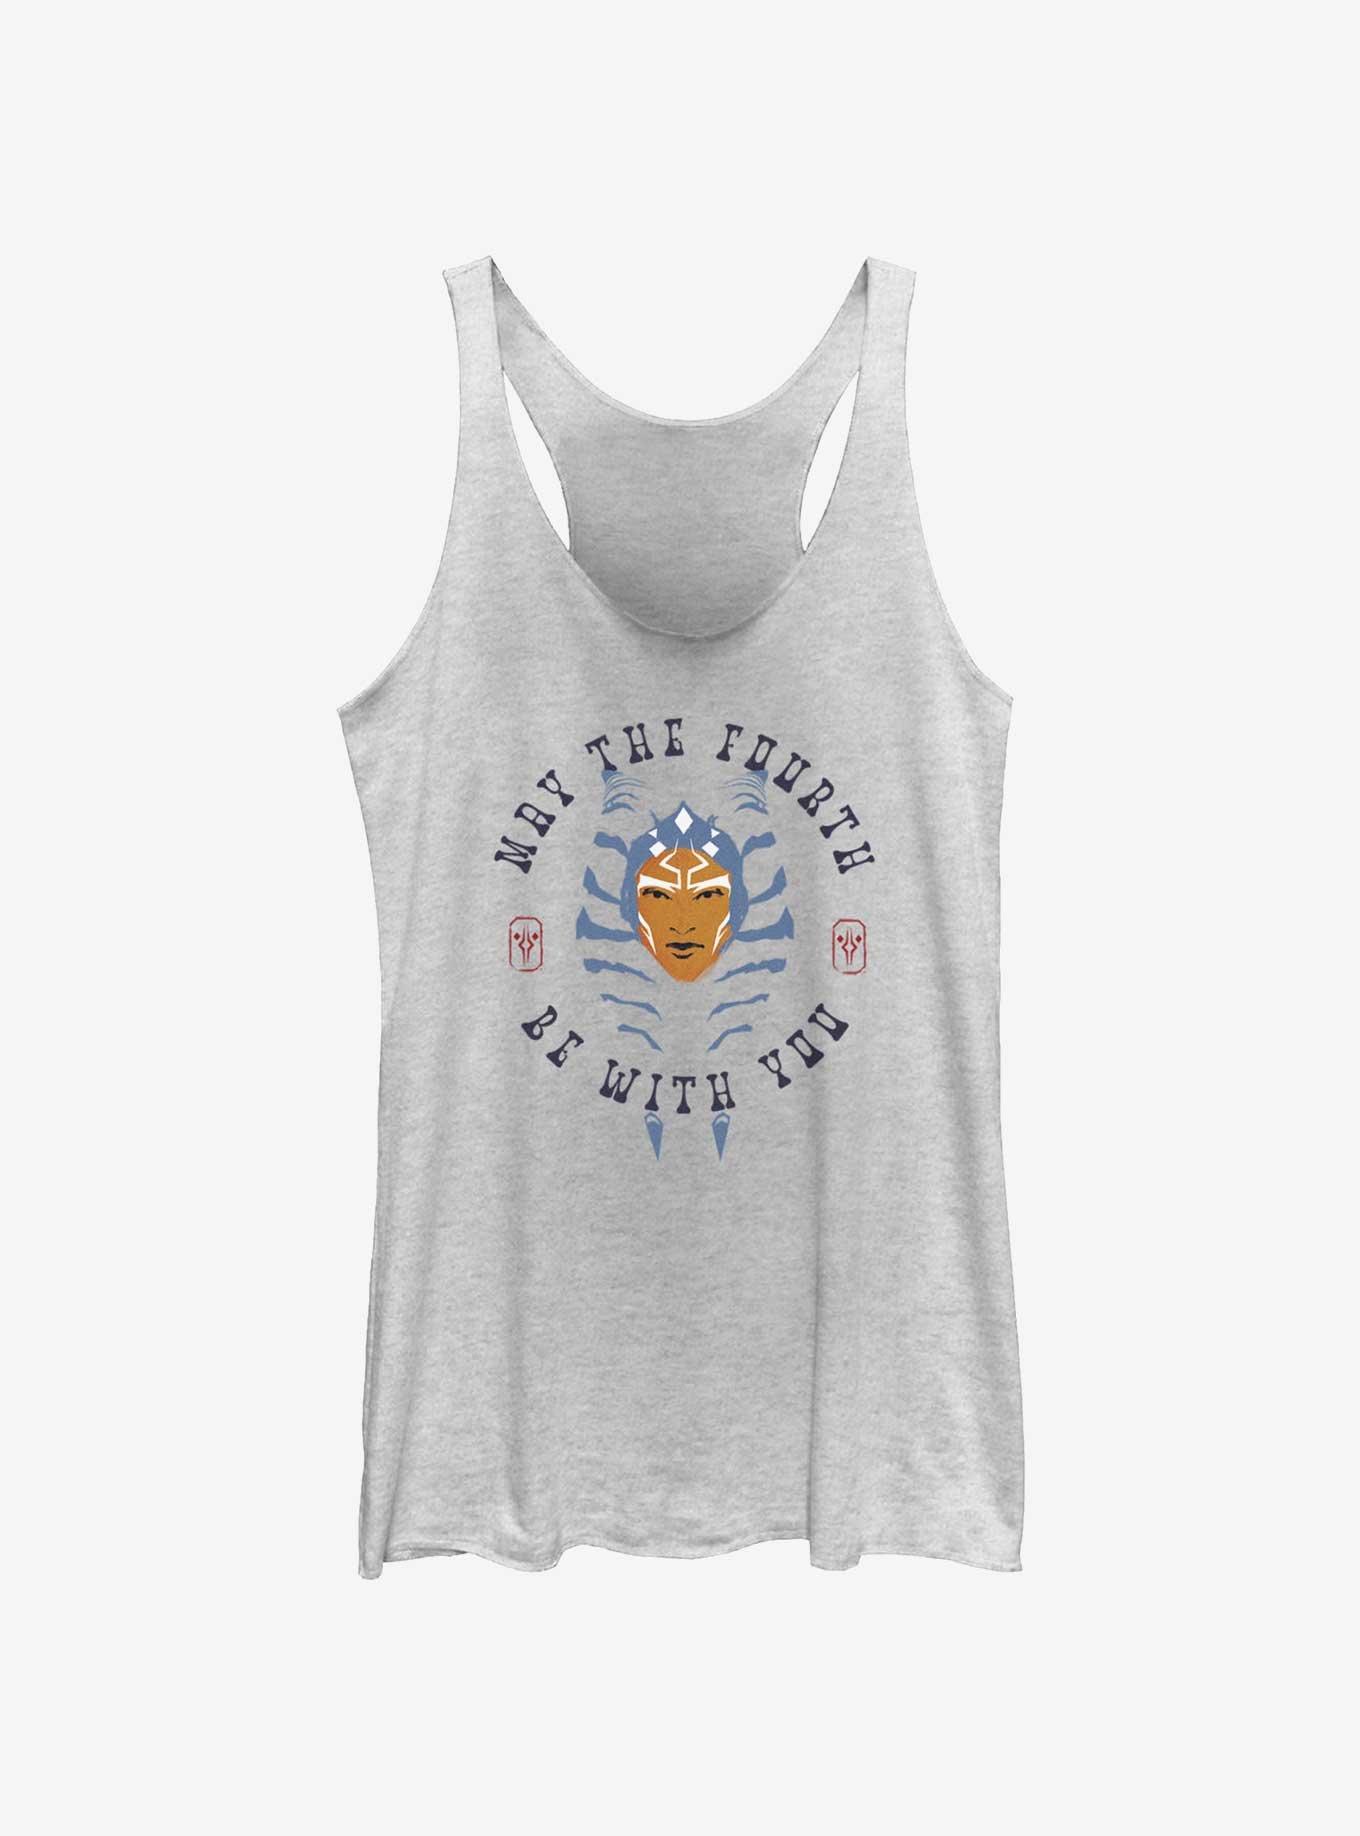 Star Wars Ahsoka May The Fourth Be With You Womens Tank Top, WHITE HTR, hi-res